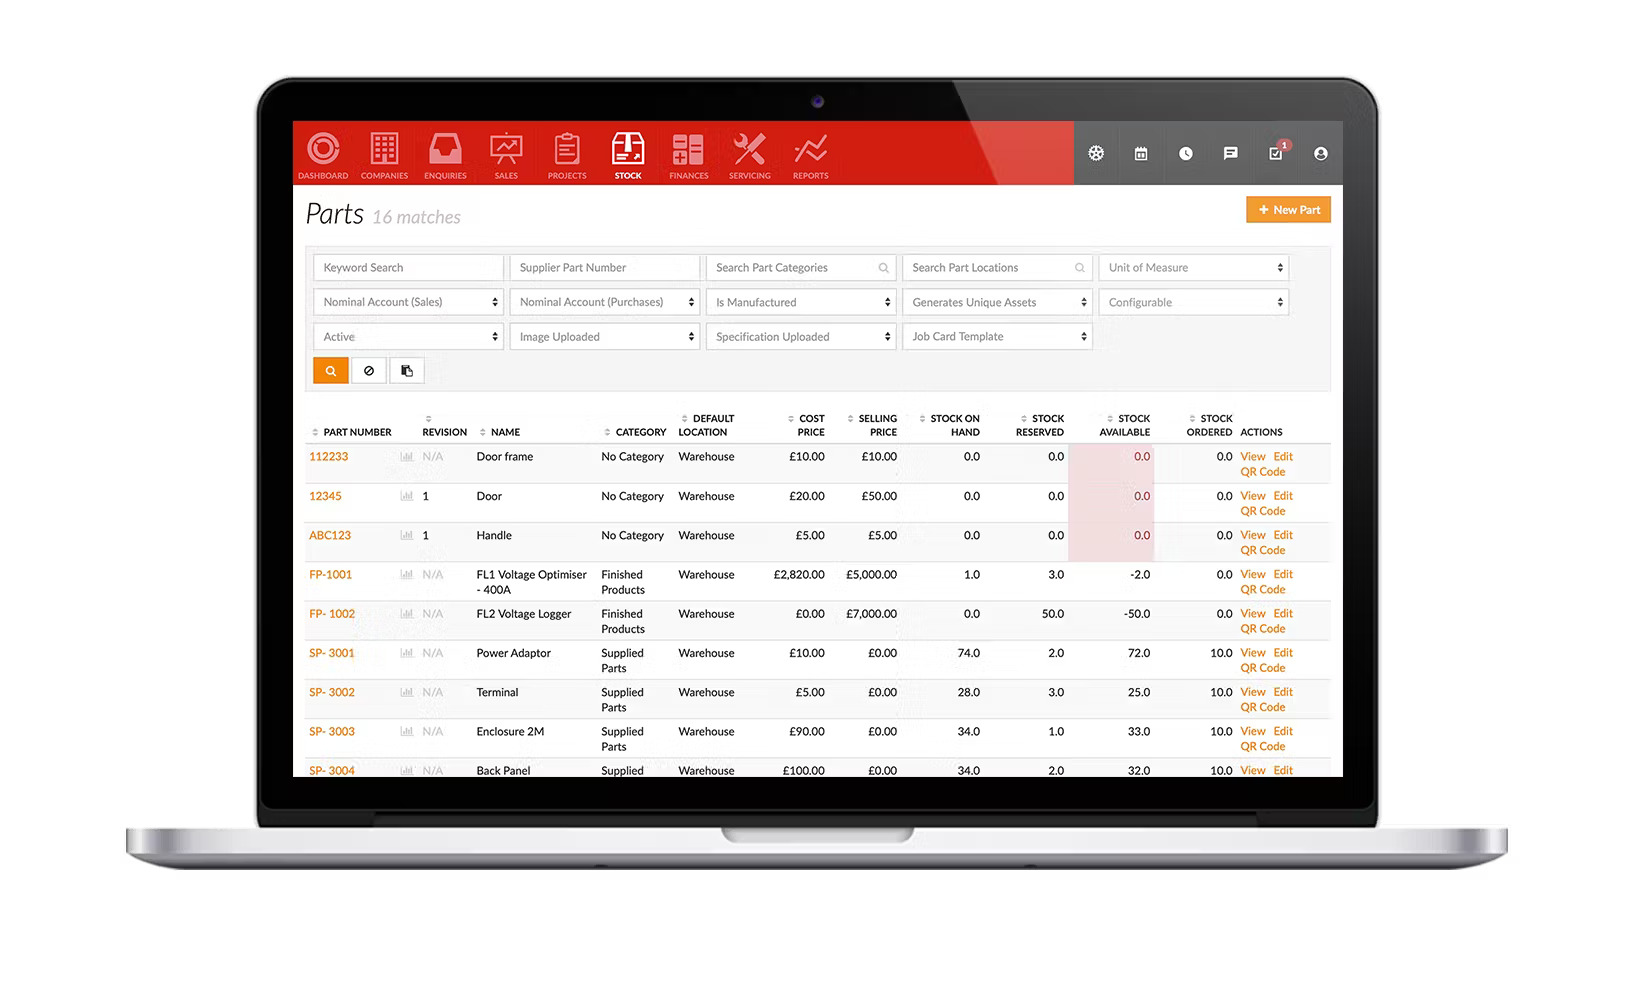 Smart and easy to use inventory management - keep track of all your SKUs and track incoming stock and assigned parts to forecast your inventory and make better buying decisions.